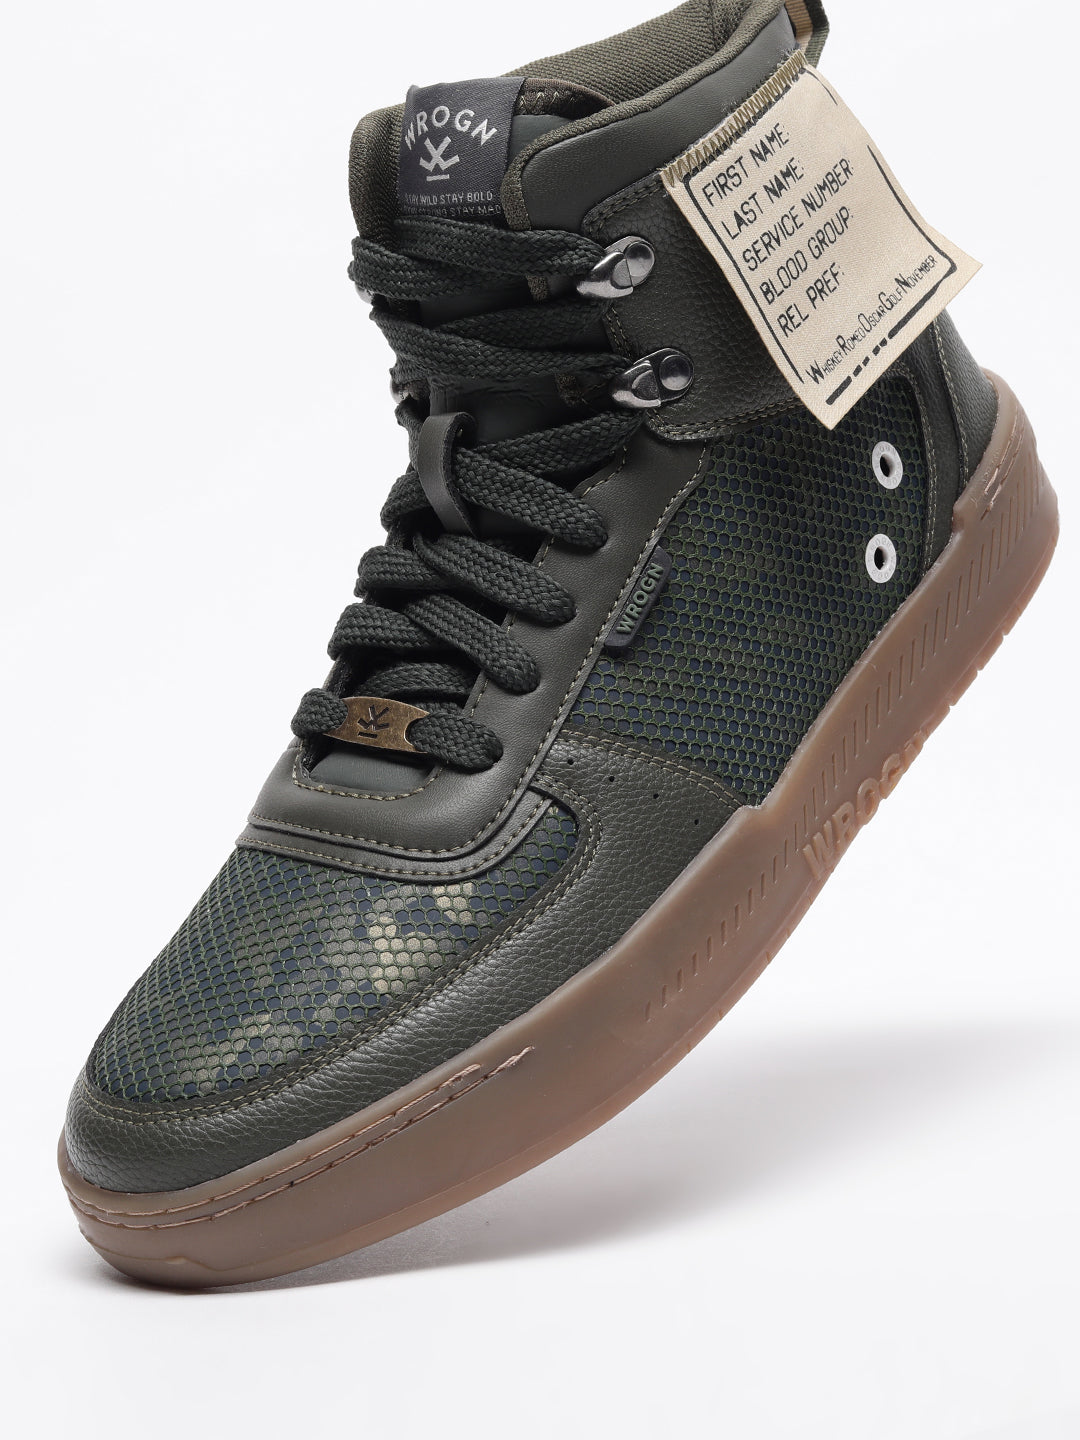 Olive Camo High Top Sneakers